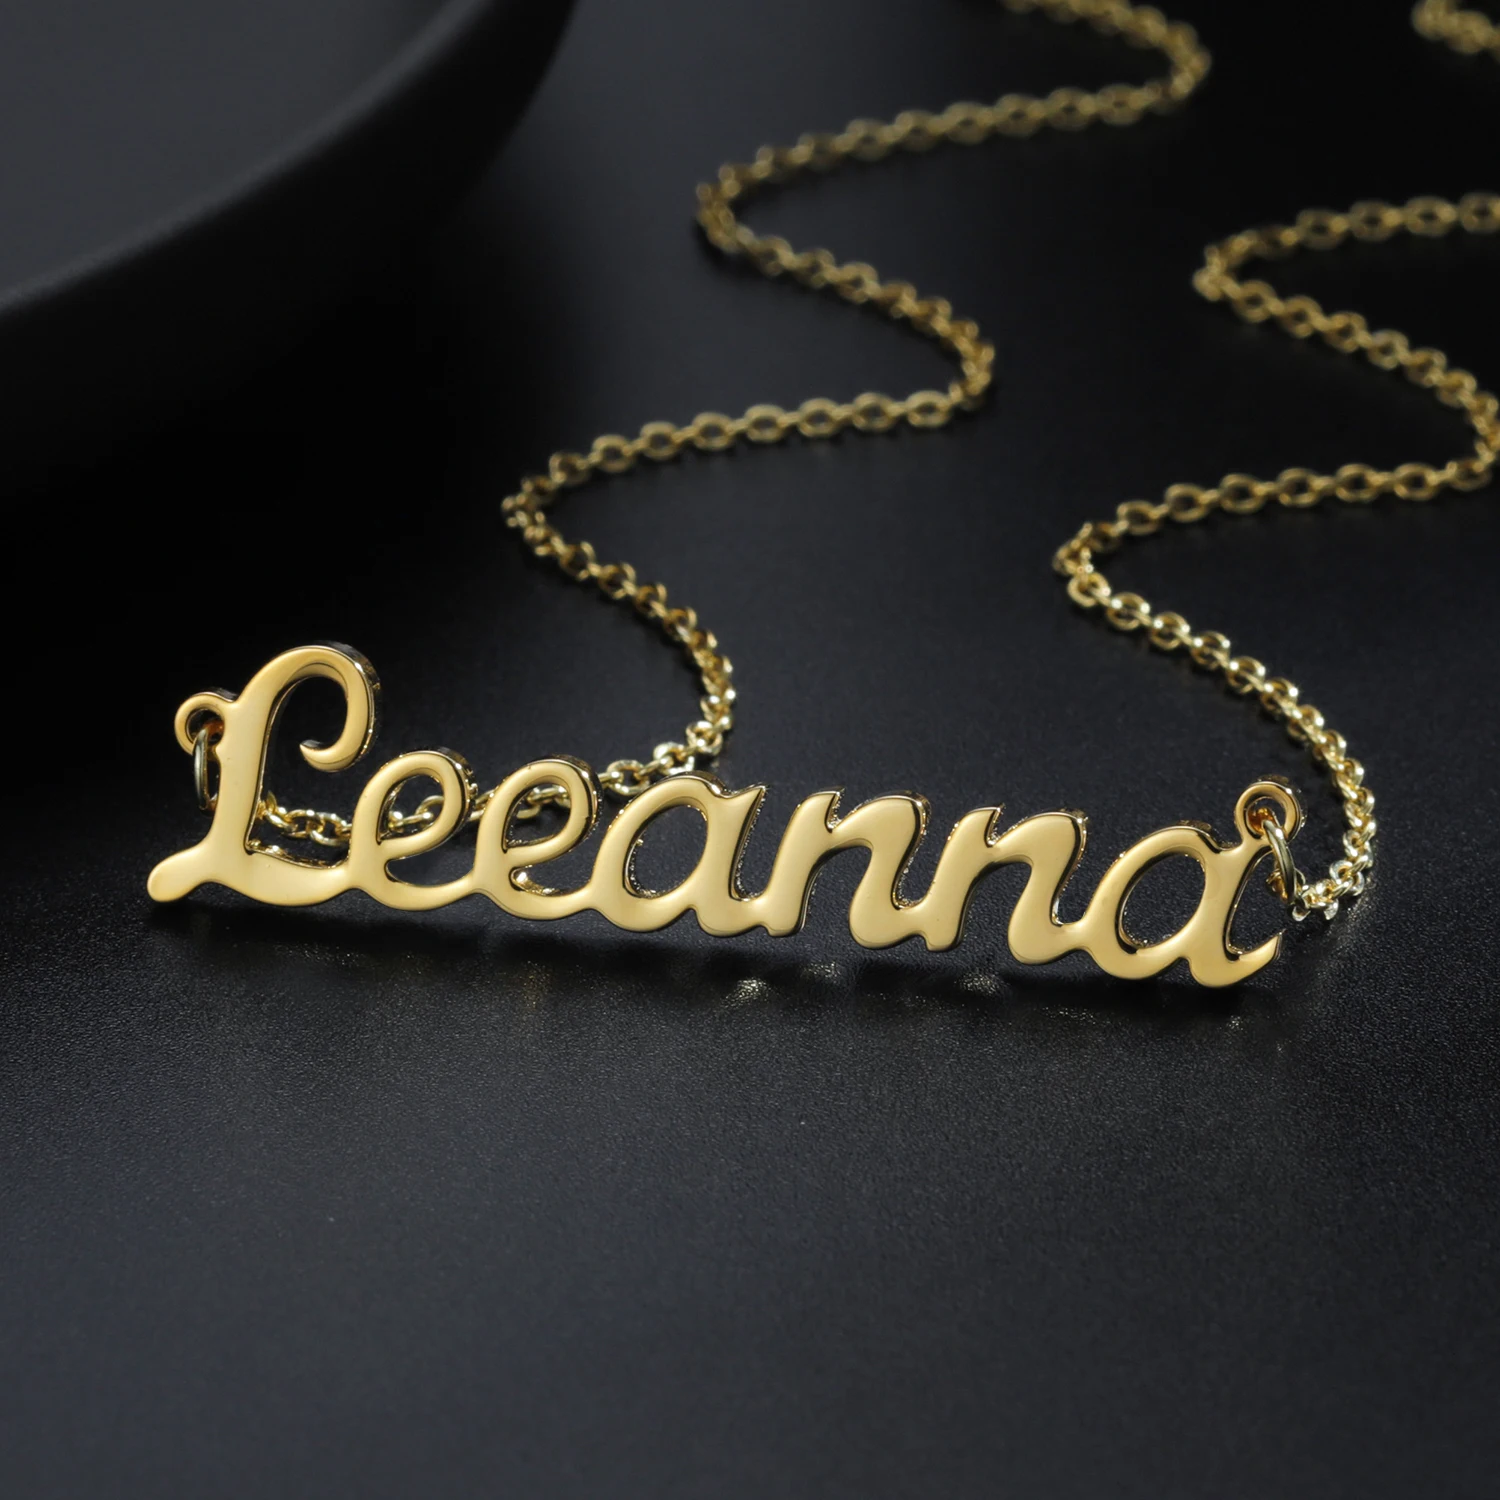 Personalized Name Necklace Gold Silver Stainless Steel Customized Necklace Name Necklace Men's Women's Personalized Name Pendant